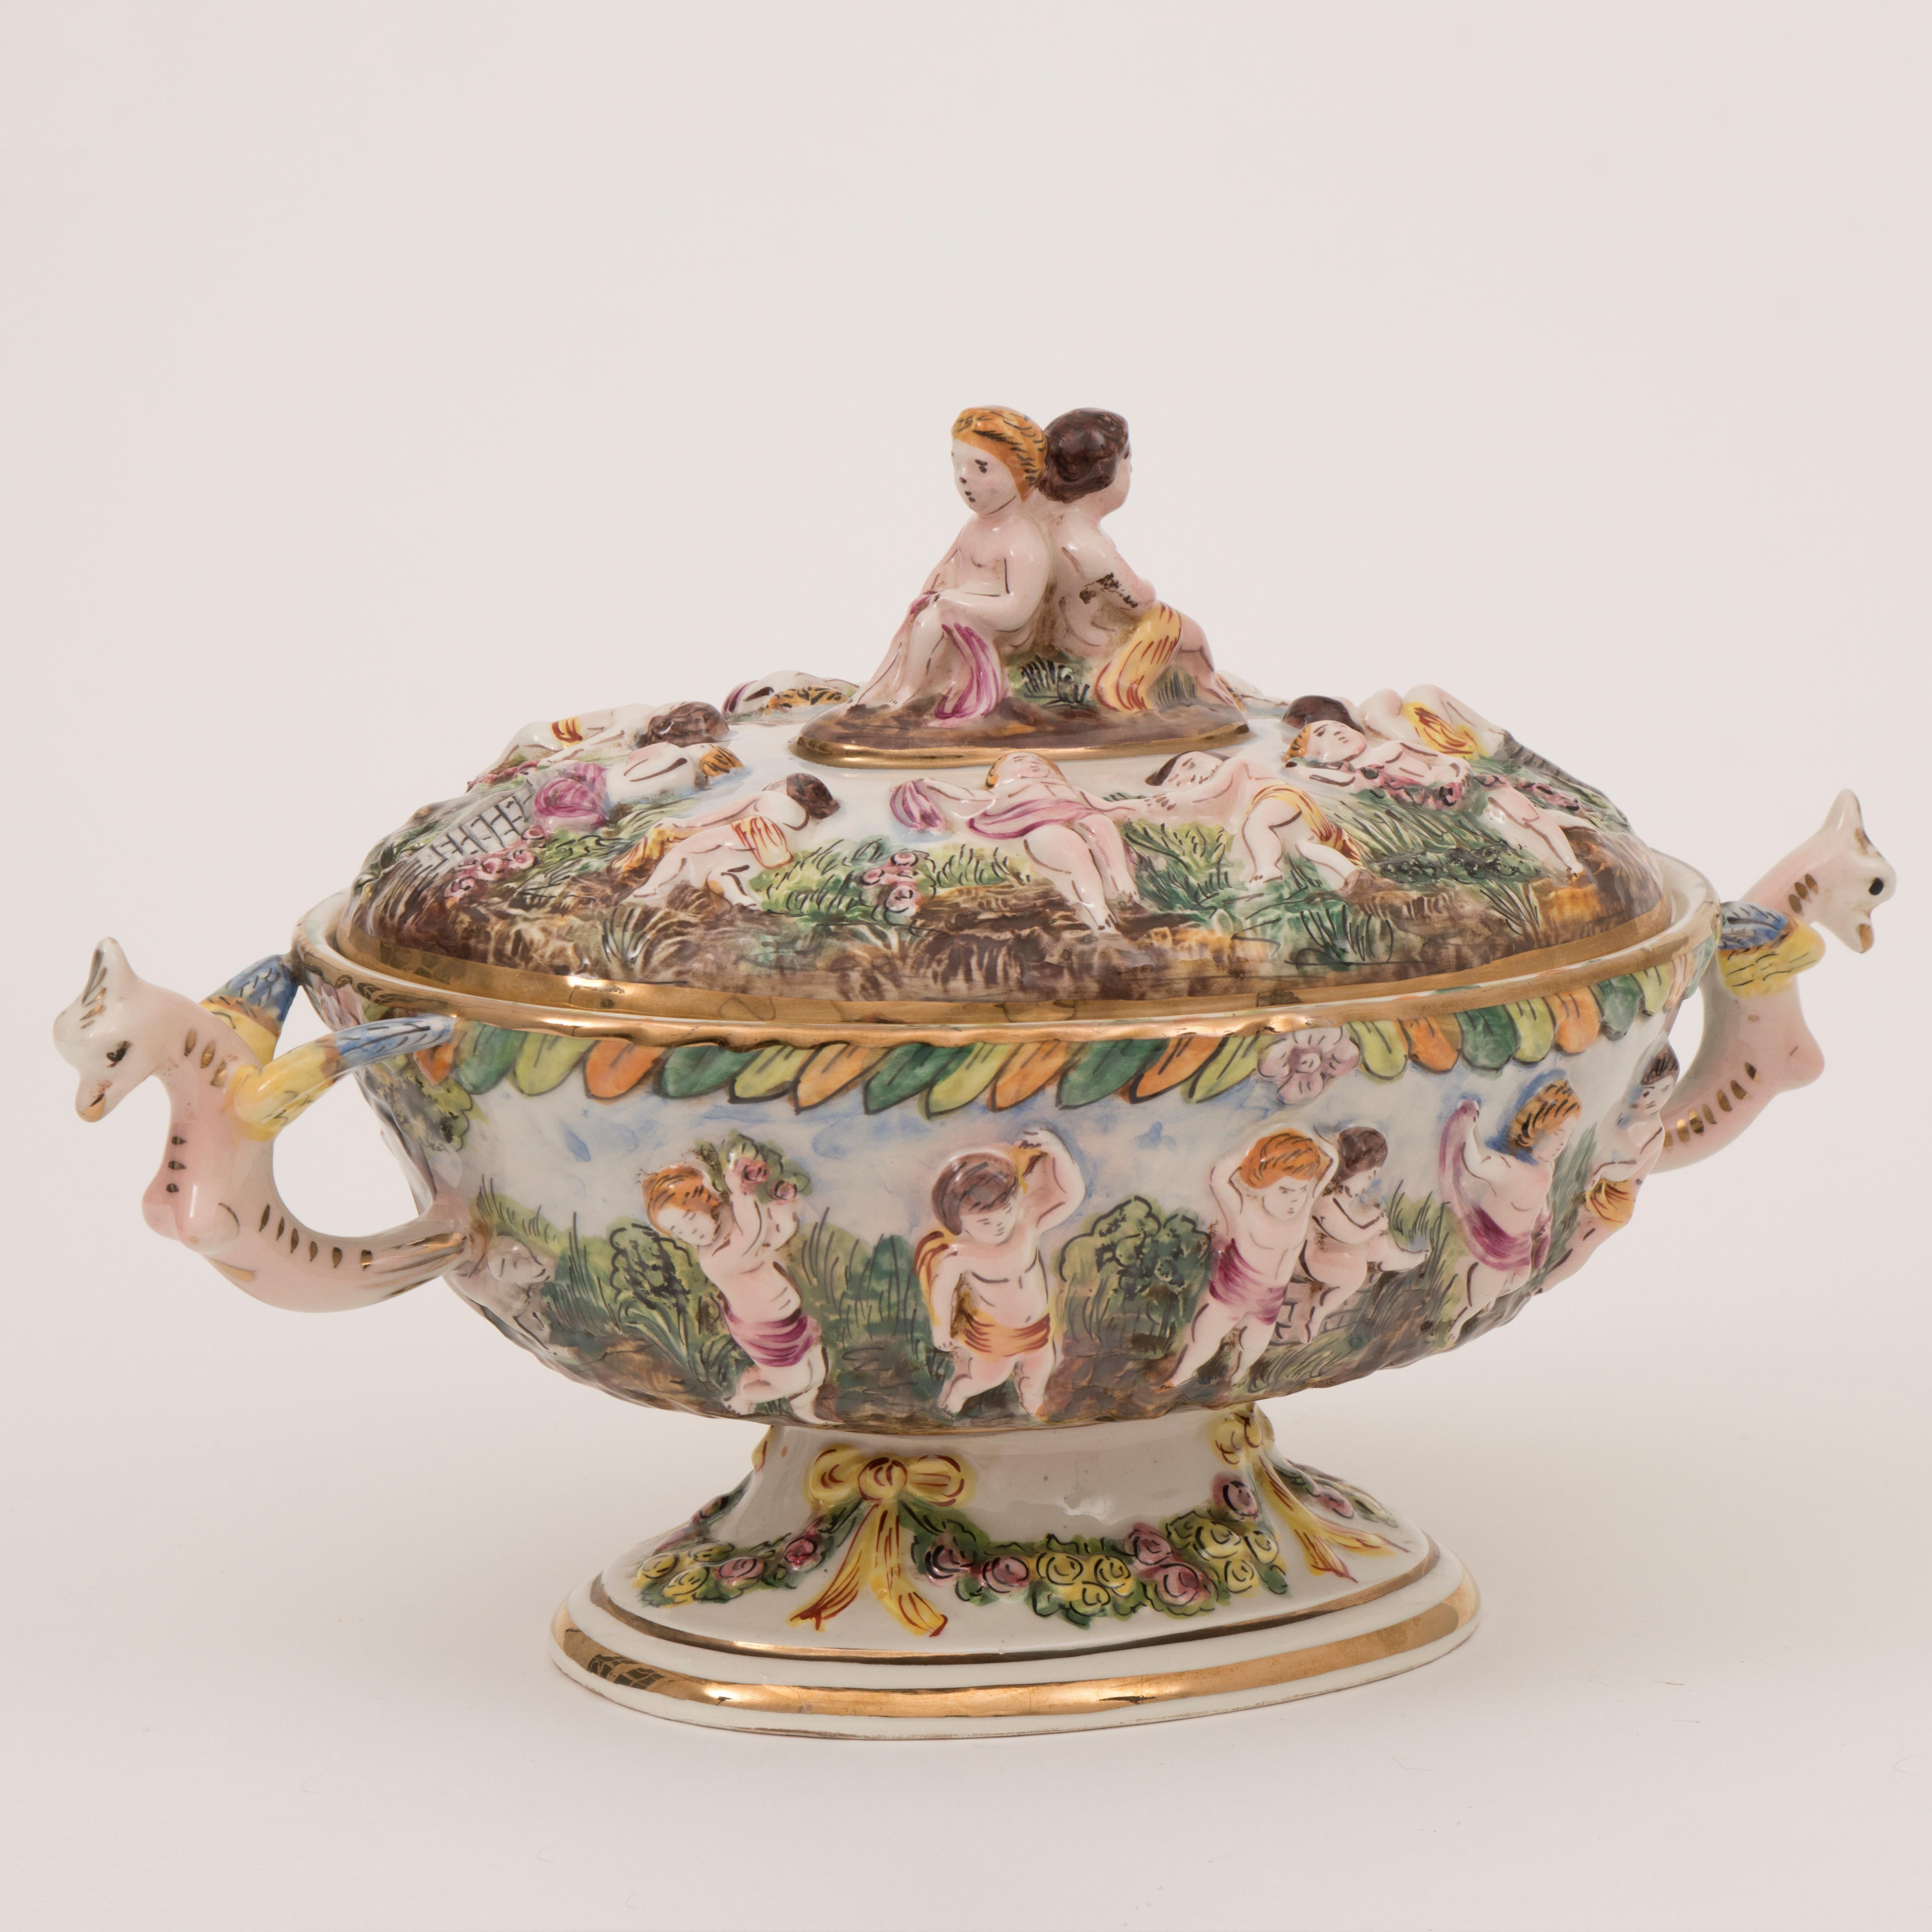 1950s vintage large Italian Capodimonte porcelain serving tureen decorated on the lid and around the outside with an array of dancing cherubs in a mythological garden. Winged breasted fawns form the matching handles on either side to help which help